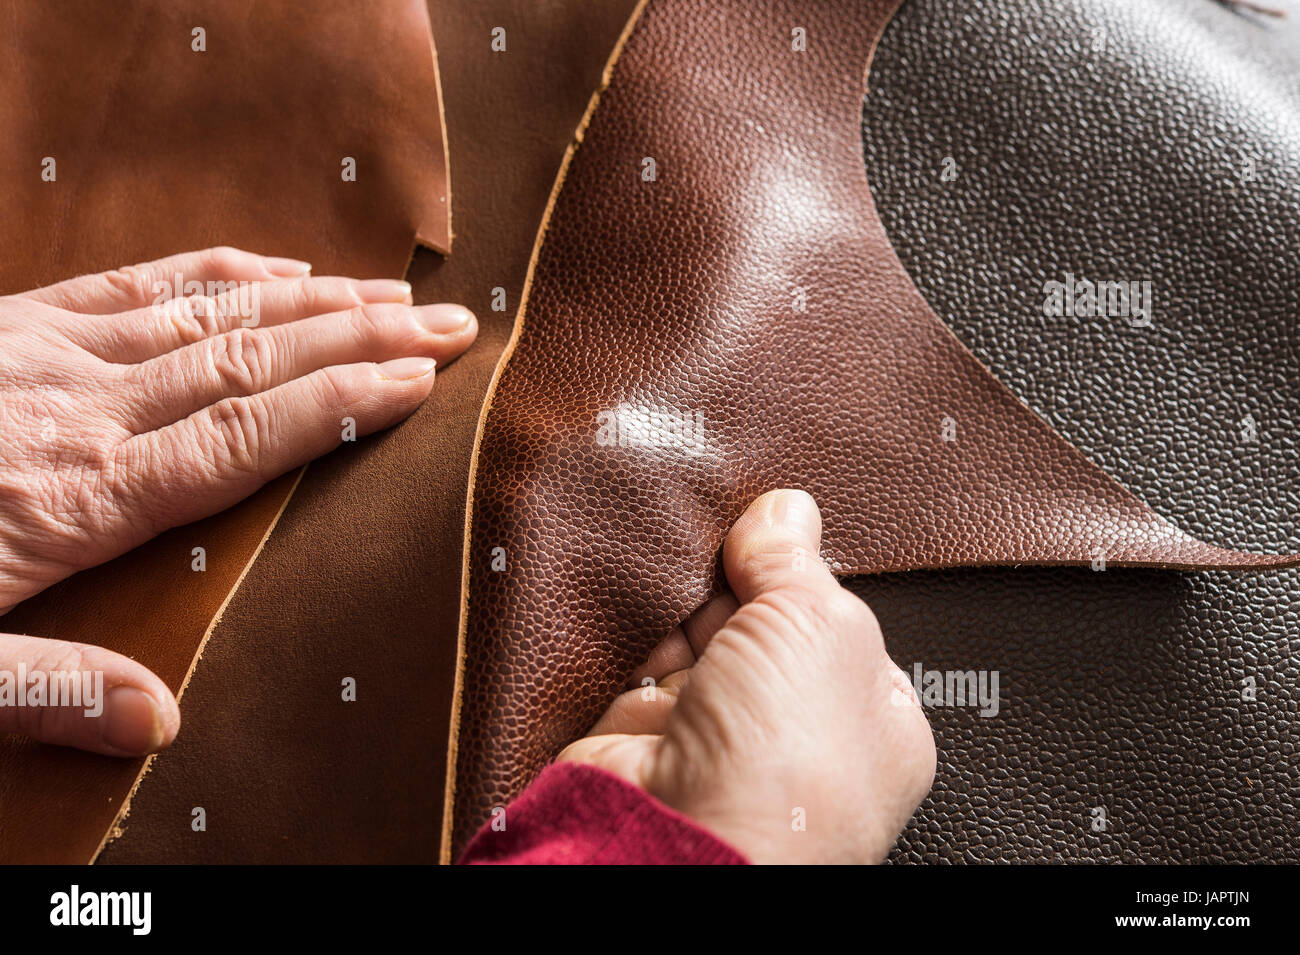 Shoemaker, hands checking brown leathers, Kainisch, Styria, Austria Stock Photo